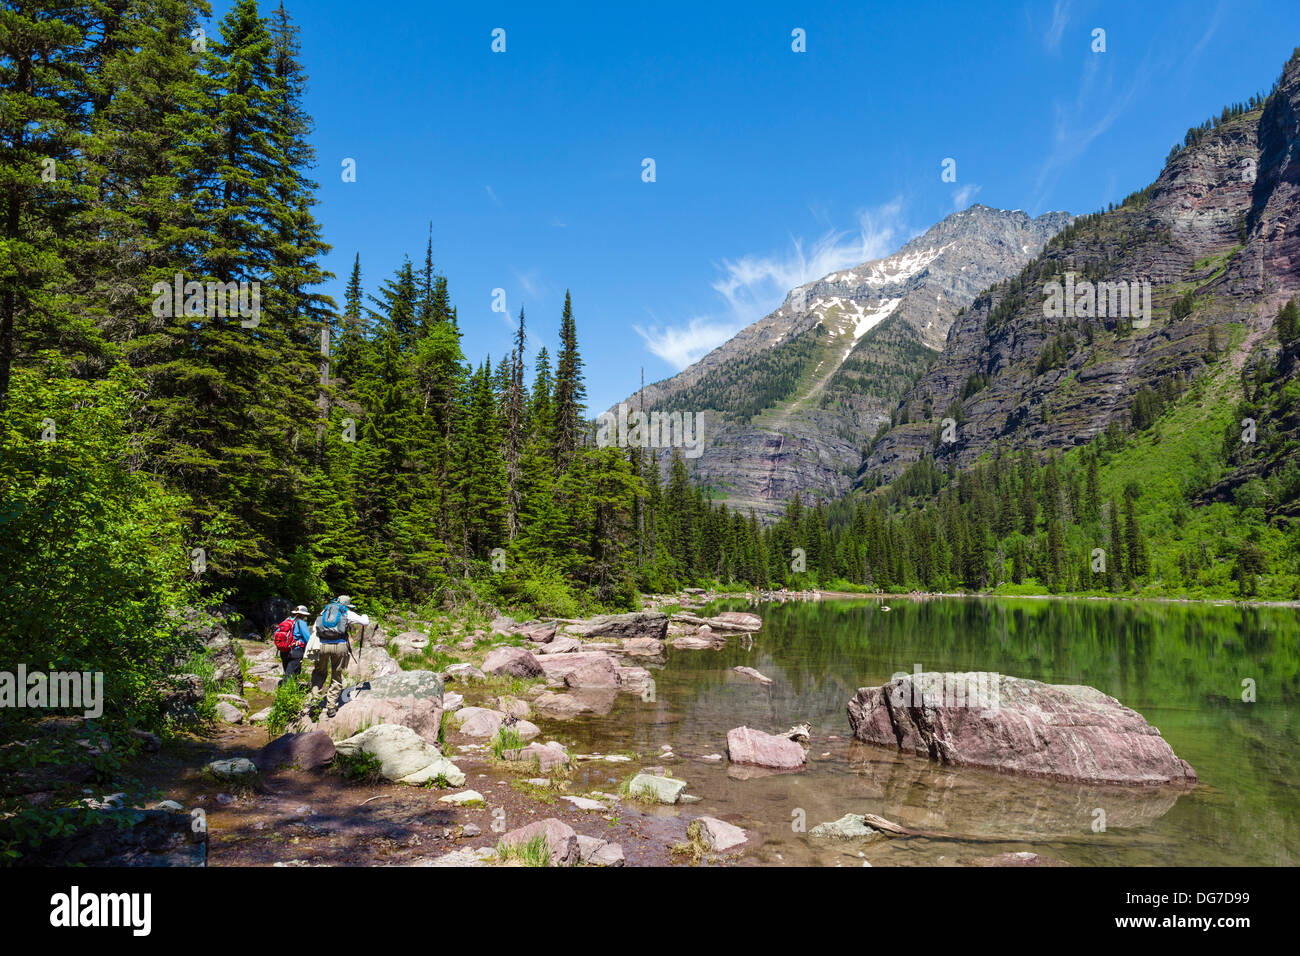 Hikers on the shore of Avalanche Lake, Glacier National Park, Montana, USA Stock Photo